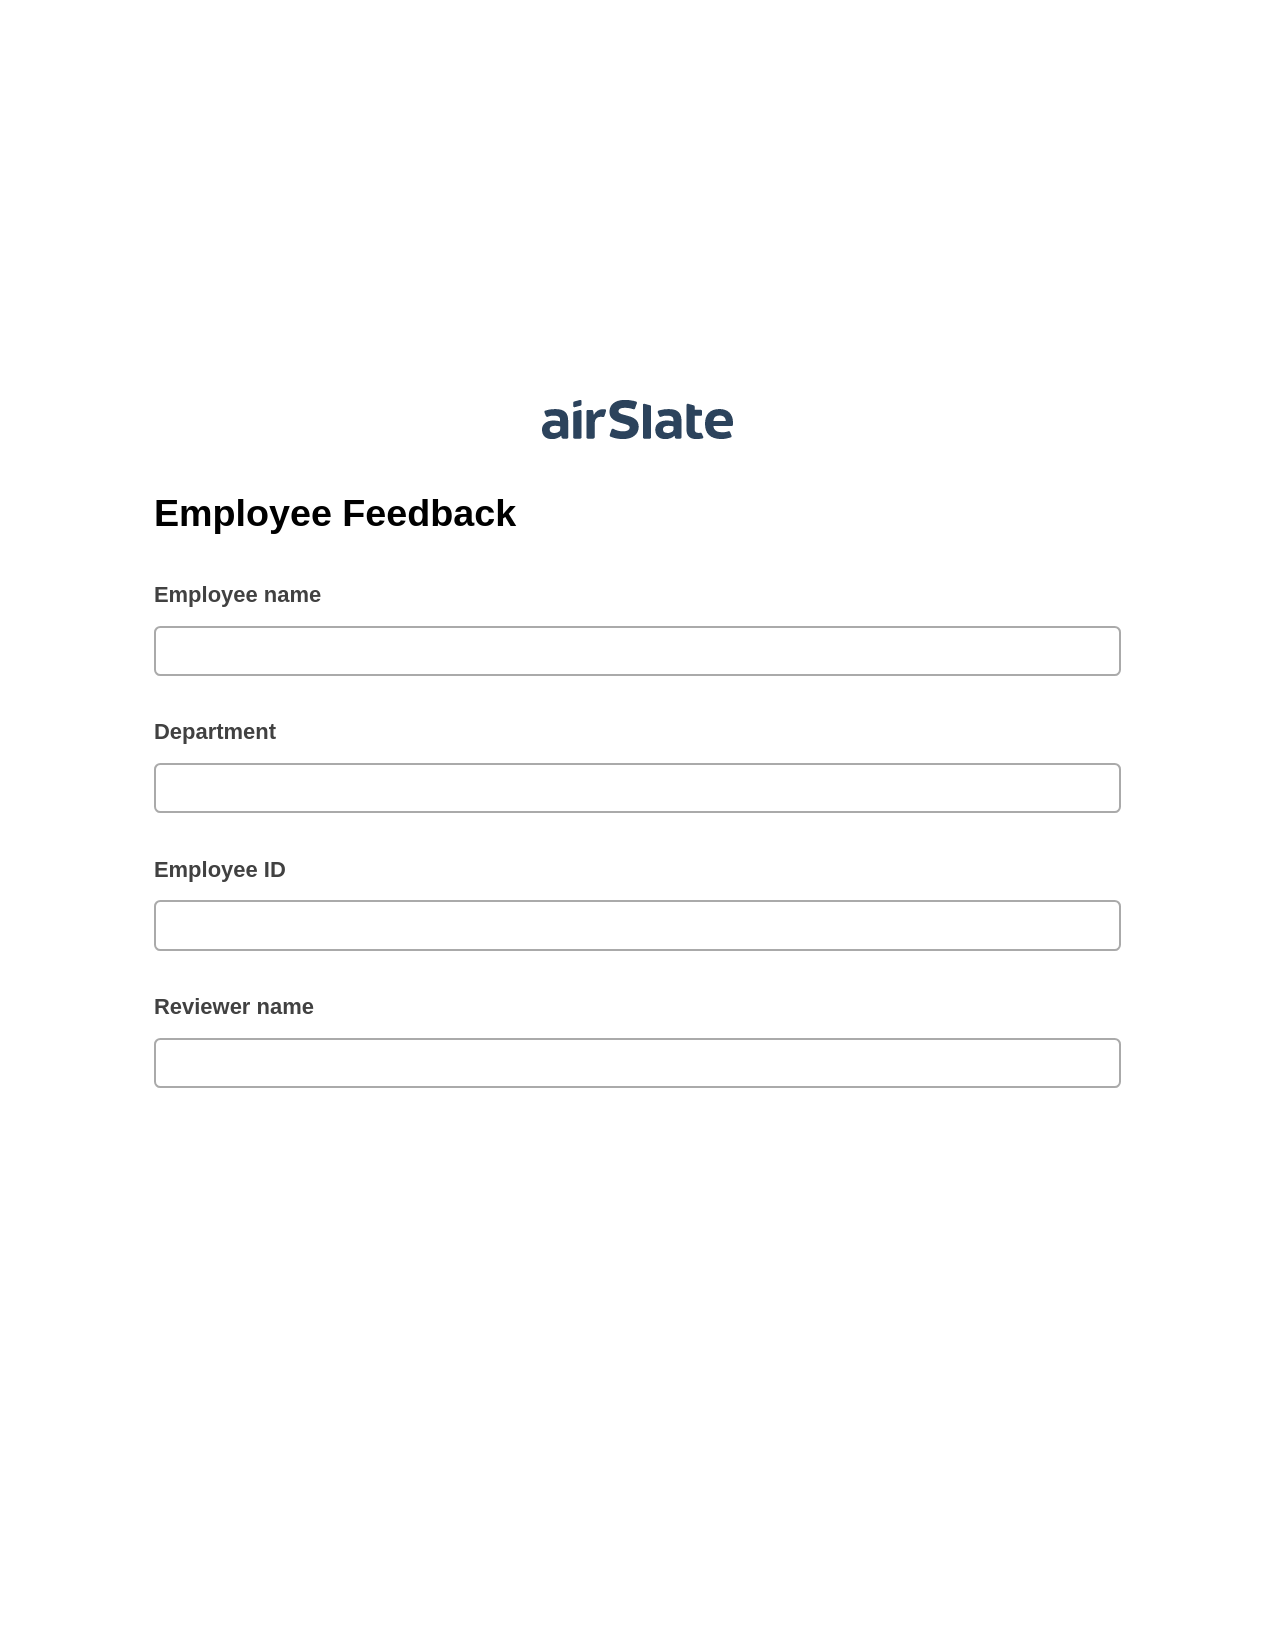 Employee Feedback Pre-fill from NetSuite Records Bot, Audit Trail Bot, Export to Google Sheet Bot